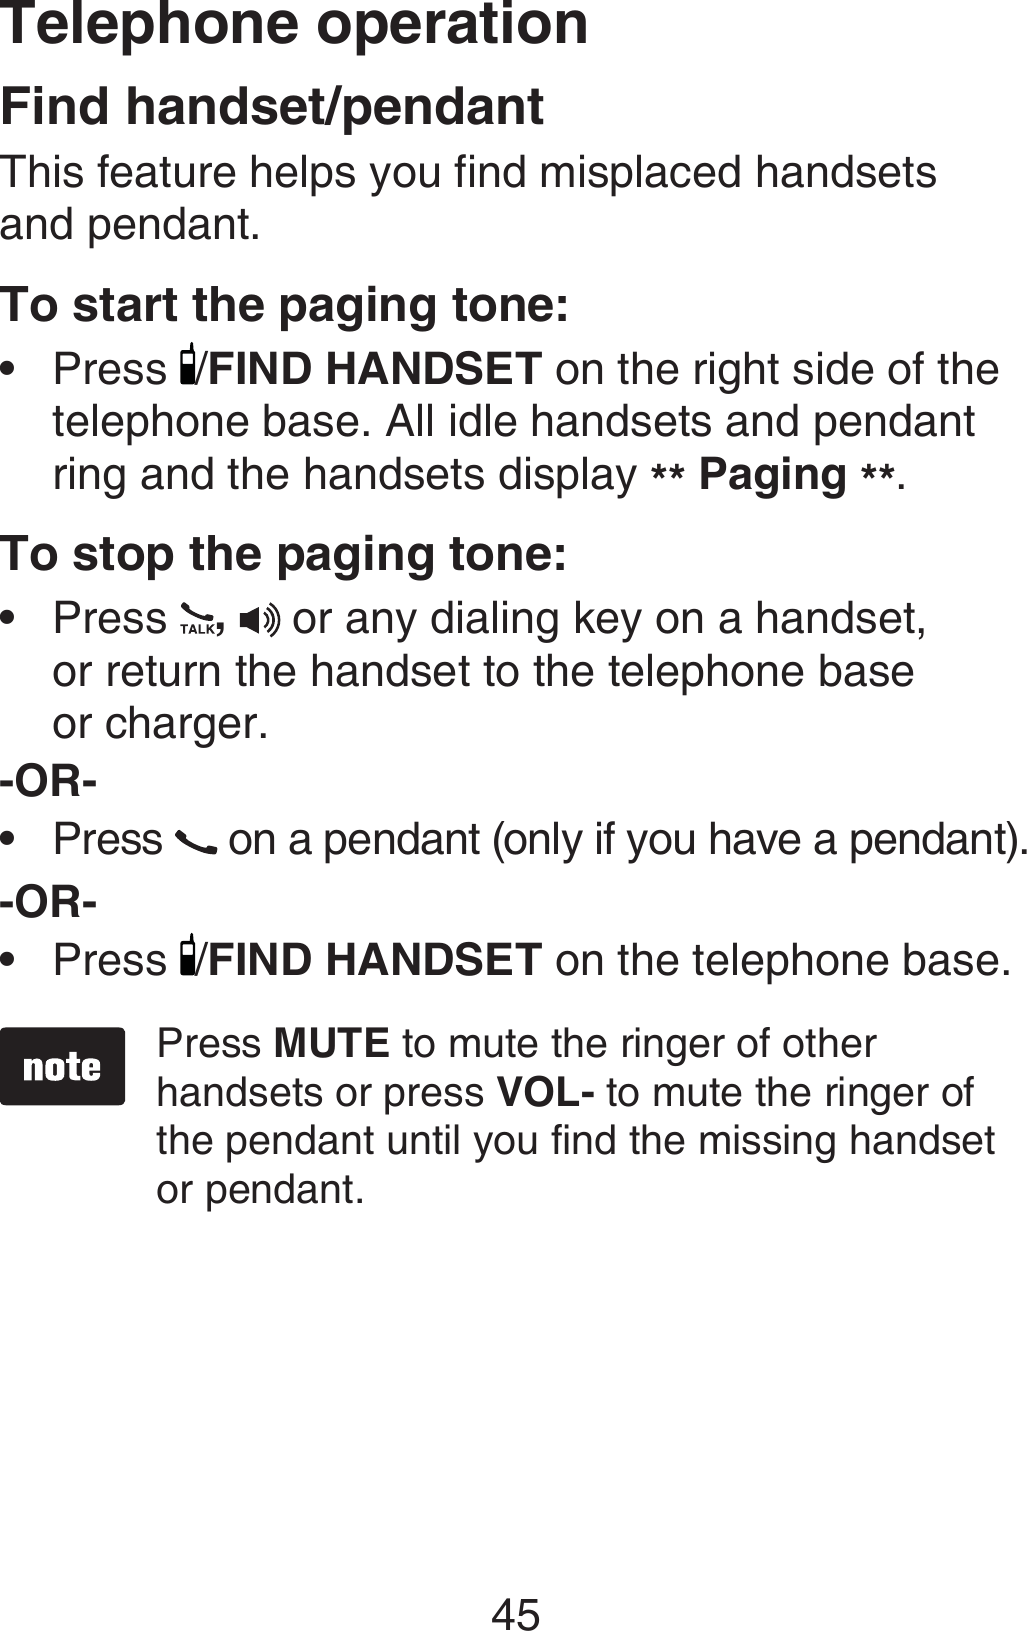 Telephone operation45Find handset/pendantThis feature helps you find misplaced handsets  and pendant.To start the paging tone: Press  /FIND HANDSET on the right side of the telephone base. All idle handsets and pendant ring and the handsets display ** Paging **.To stop the paging tone:Press  ,  or any dialing key on a handset,  or return the handset to the telephone base  or charger.-OR-Press   on a pendant (only if you have a pendant).-OR-Press  /FIND HANDSET on the telephone base.Press MUTE to mute the ringer of other handsets or press VOL- to mute the ringer of the pendant until you find the missing handset or pendant.••••